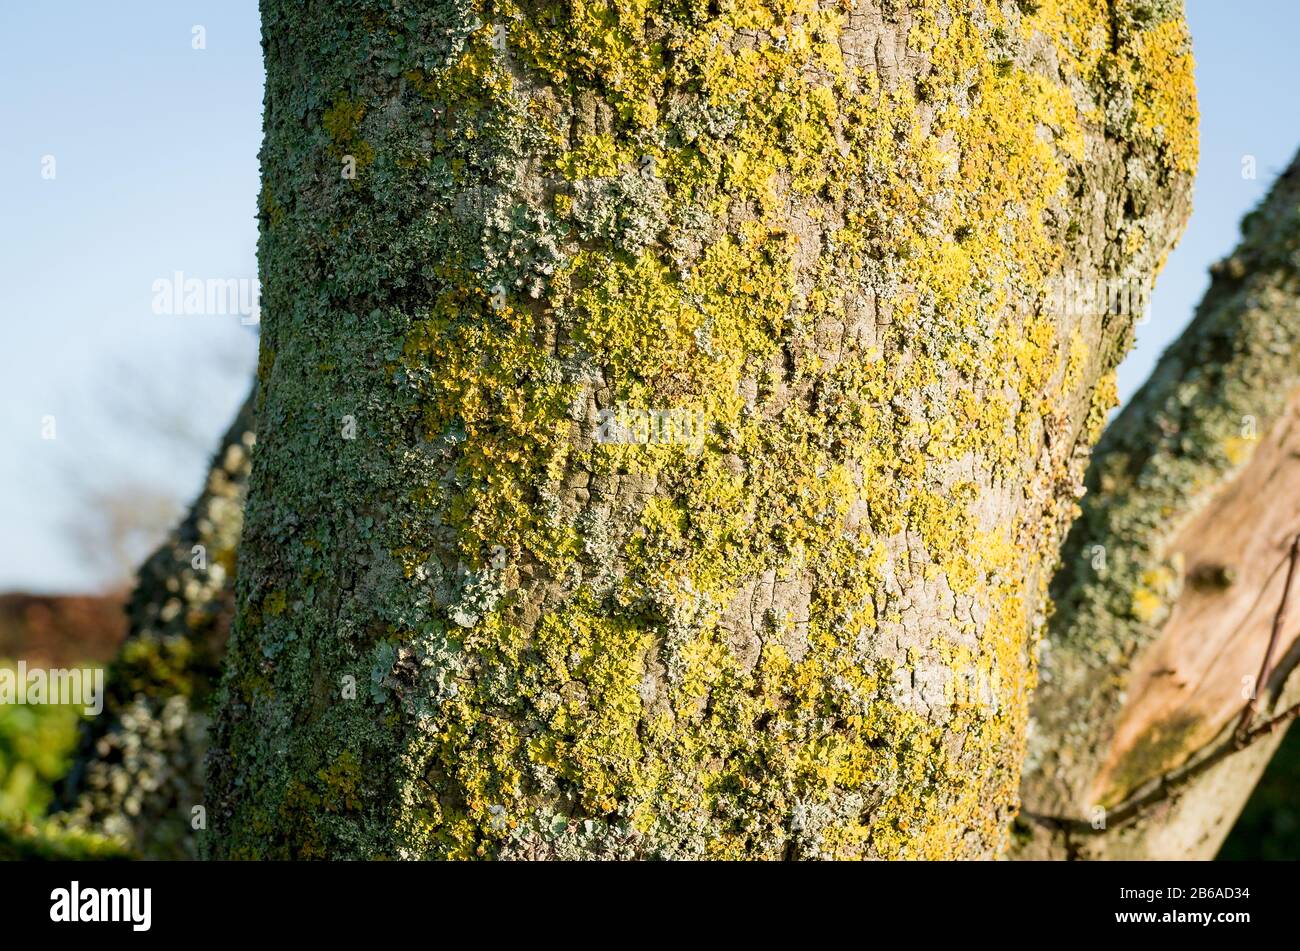 Close up of a trunk of an old Field Maple tree showing fissured bark and various lichens growing on the crevices of the tree Stock Photo